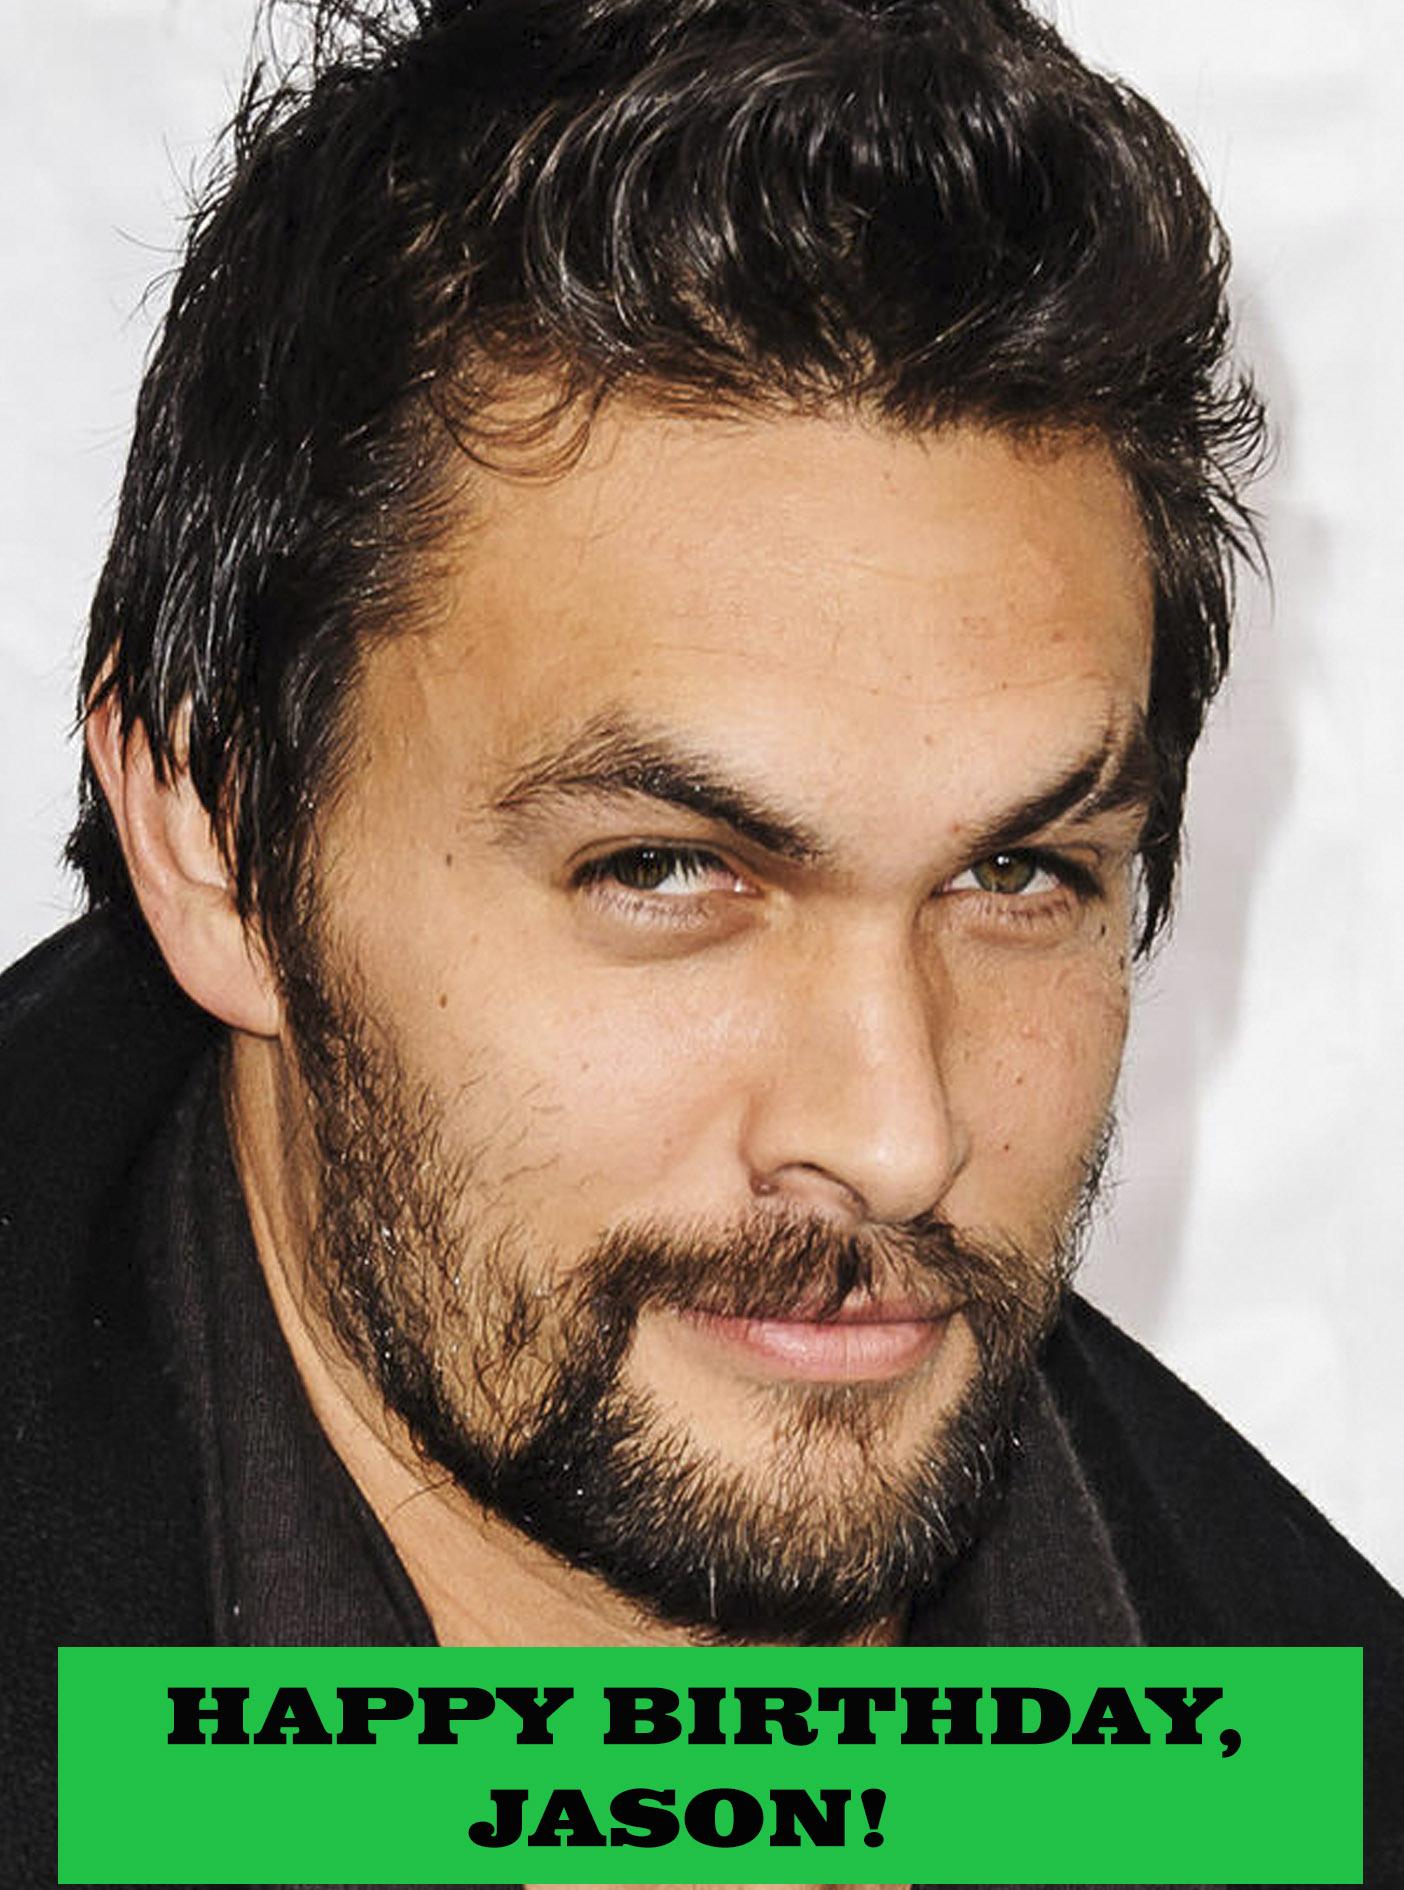 Movie Loft wishing a Happy Birthday to Jason Momoa. We will see him as Aquaman sometime in 2018. 